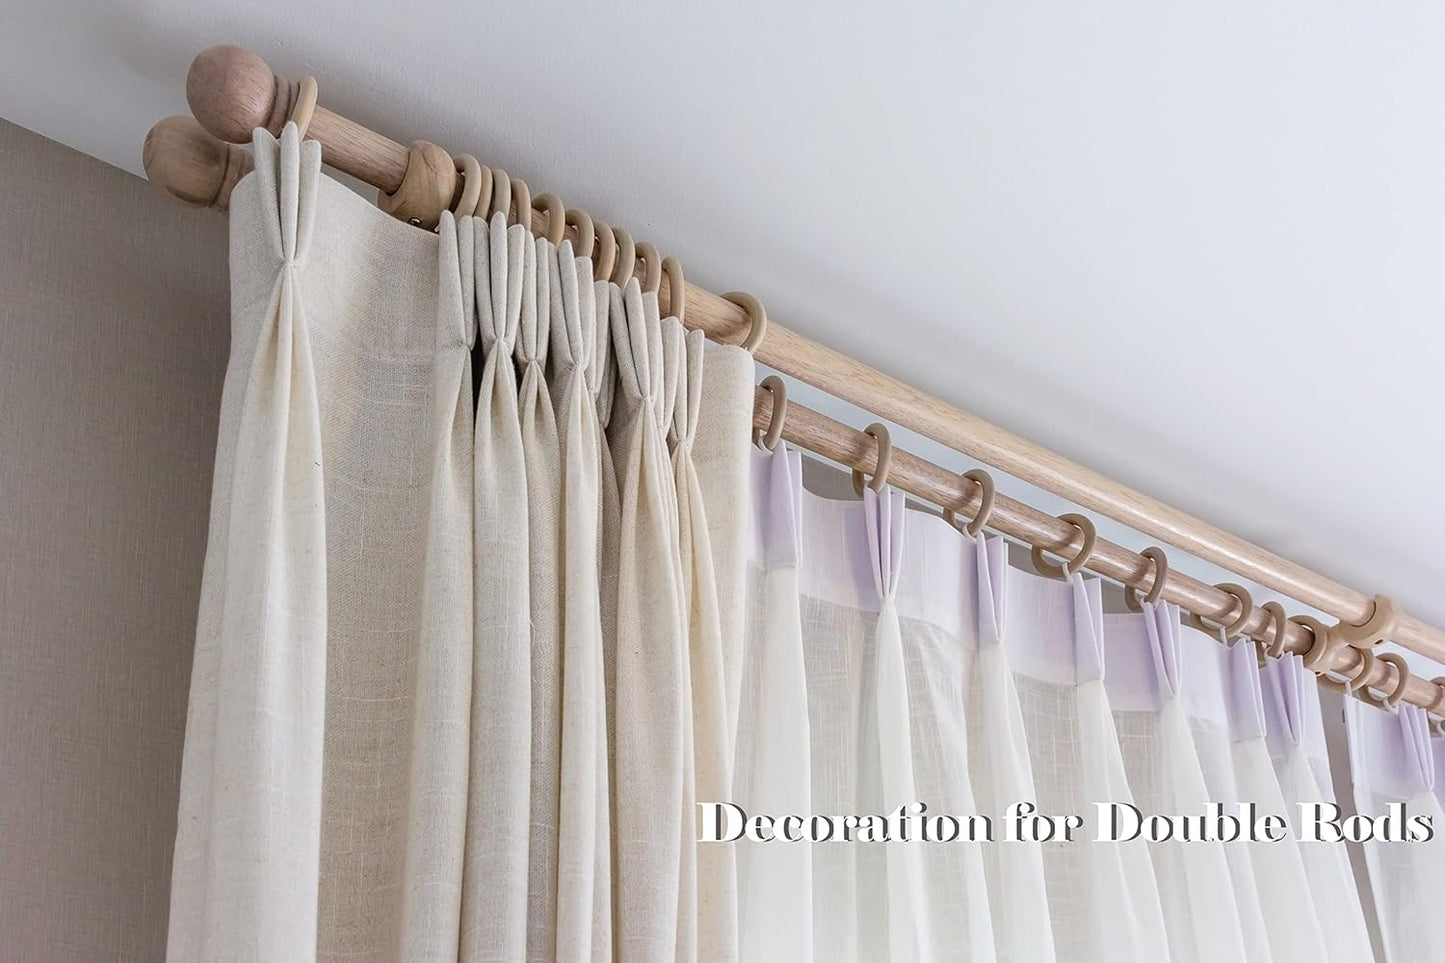 Vision Home Natural Pinch Pleated Semi Sheer Curtains Textured Linen Blended Light Filtering Window Curtains 84 Inch for Living Room Bedroom Pinch Pleat Drapes with Hooks 2 Panels 42" Wx84 L  Vision Home   